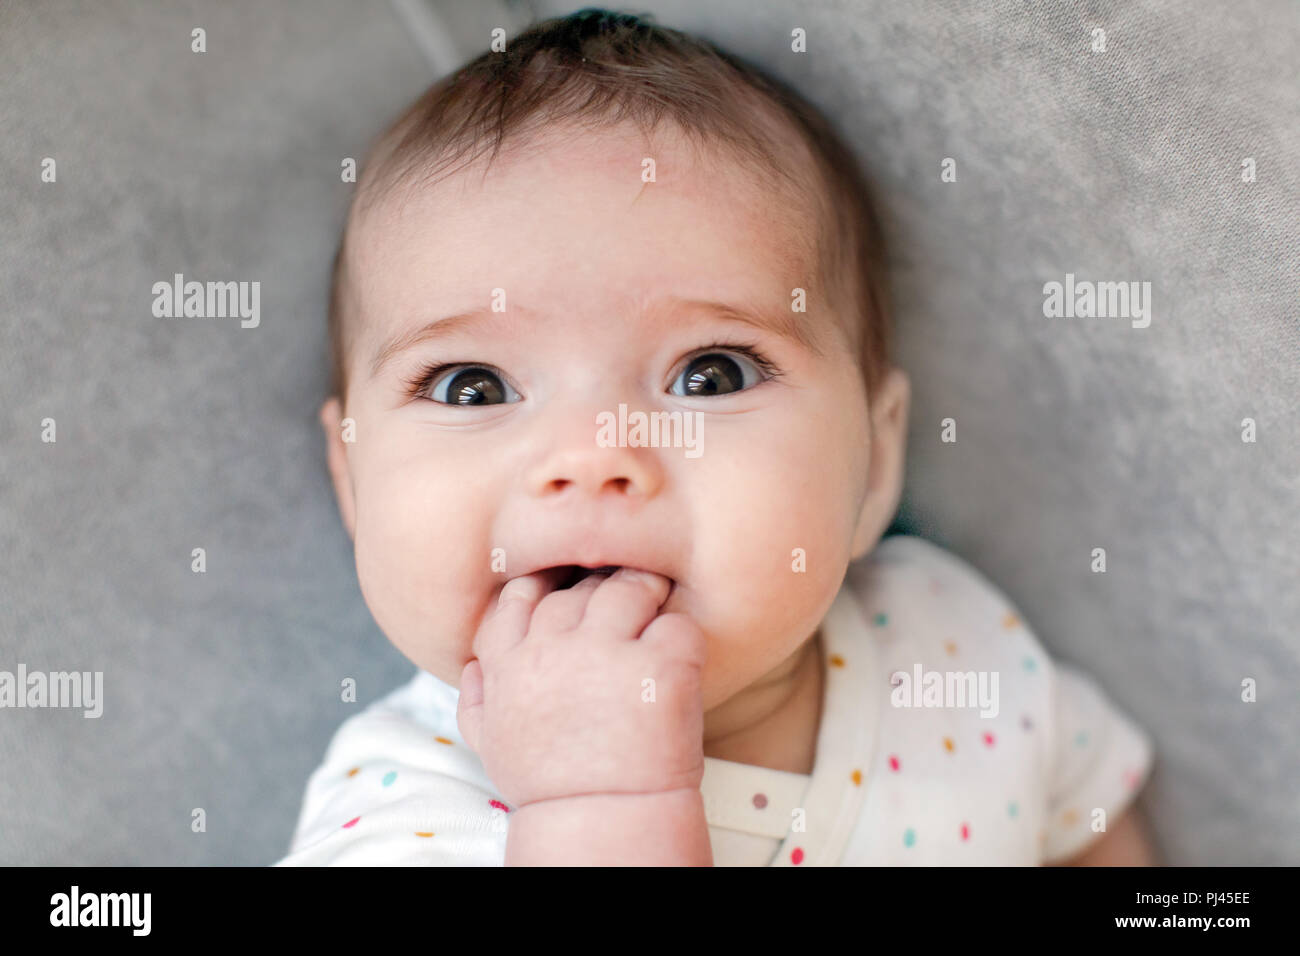 Funny baby biting fingers Stock Photo